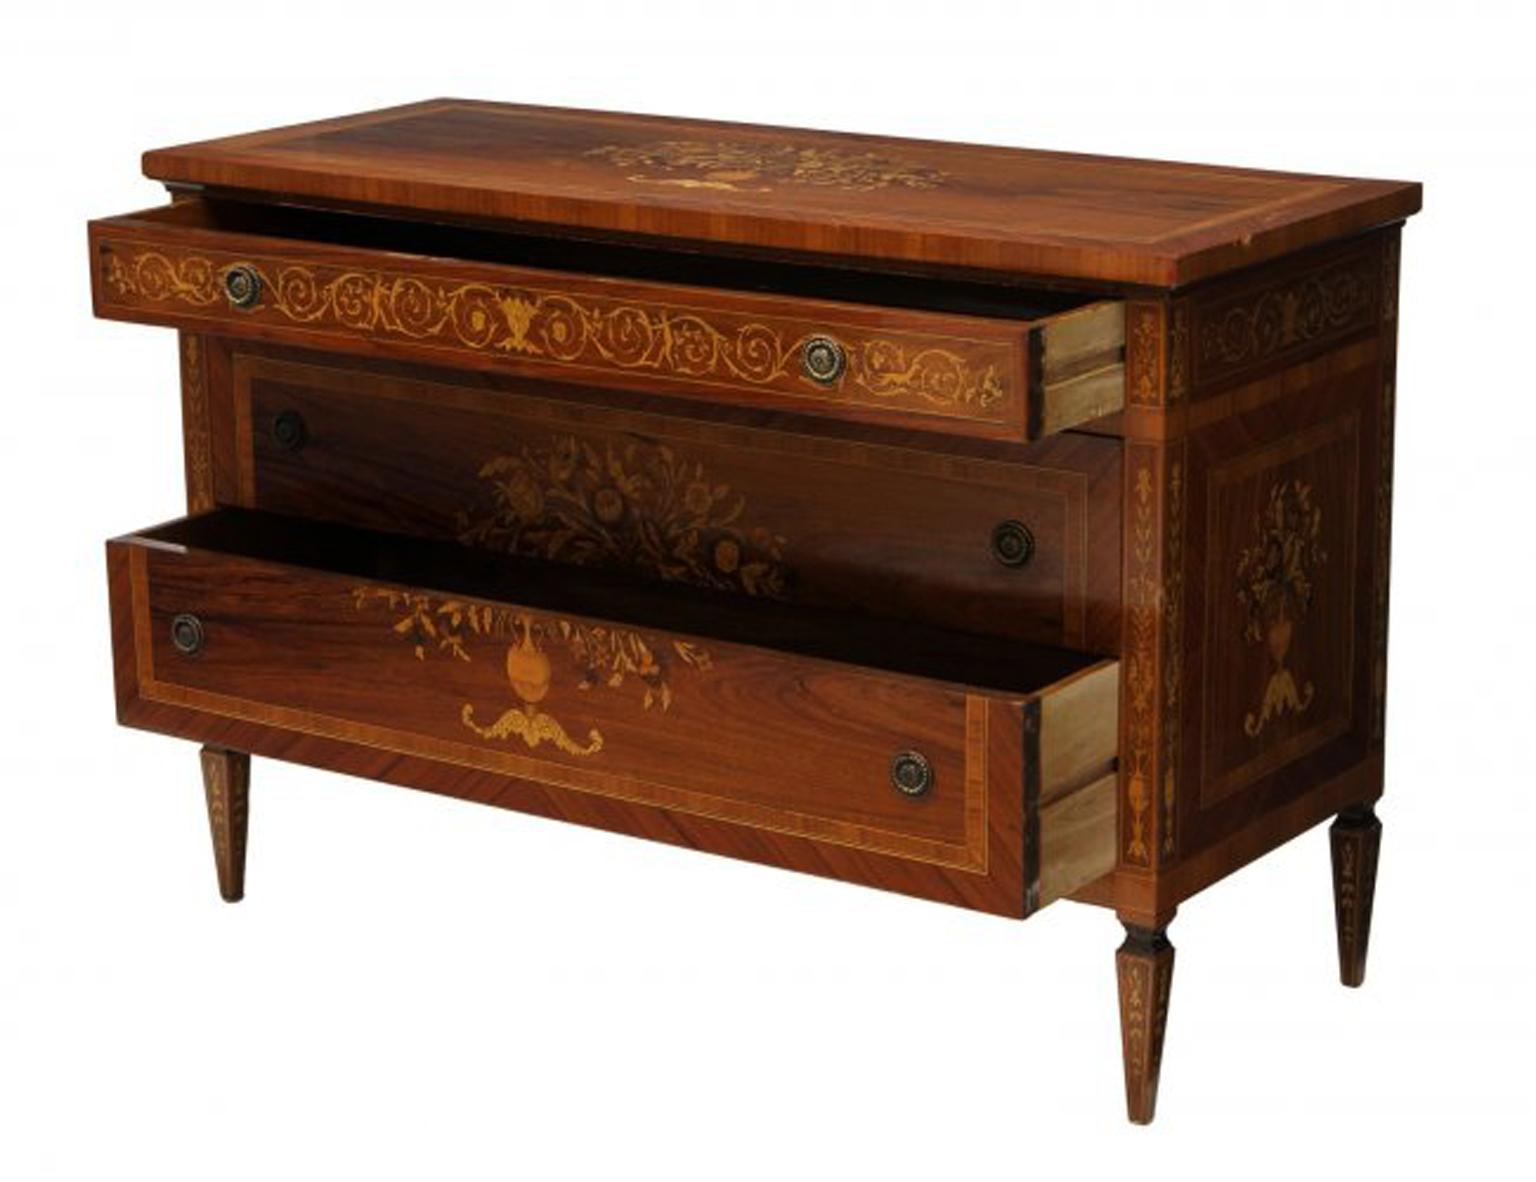 Carved Italian Milanese Maggiolini Style Inlaid Commode